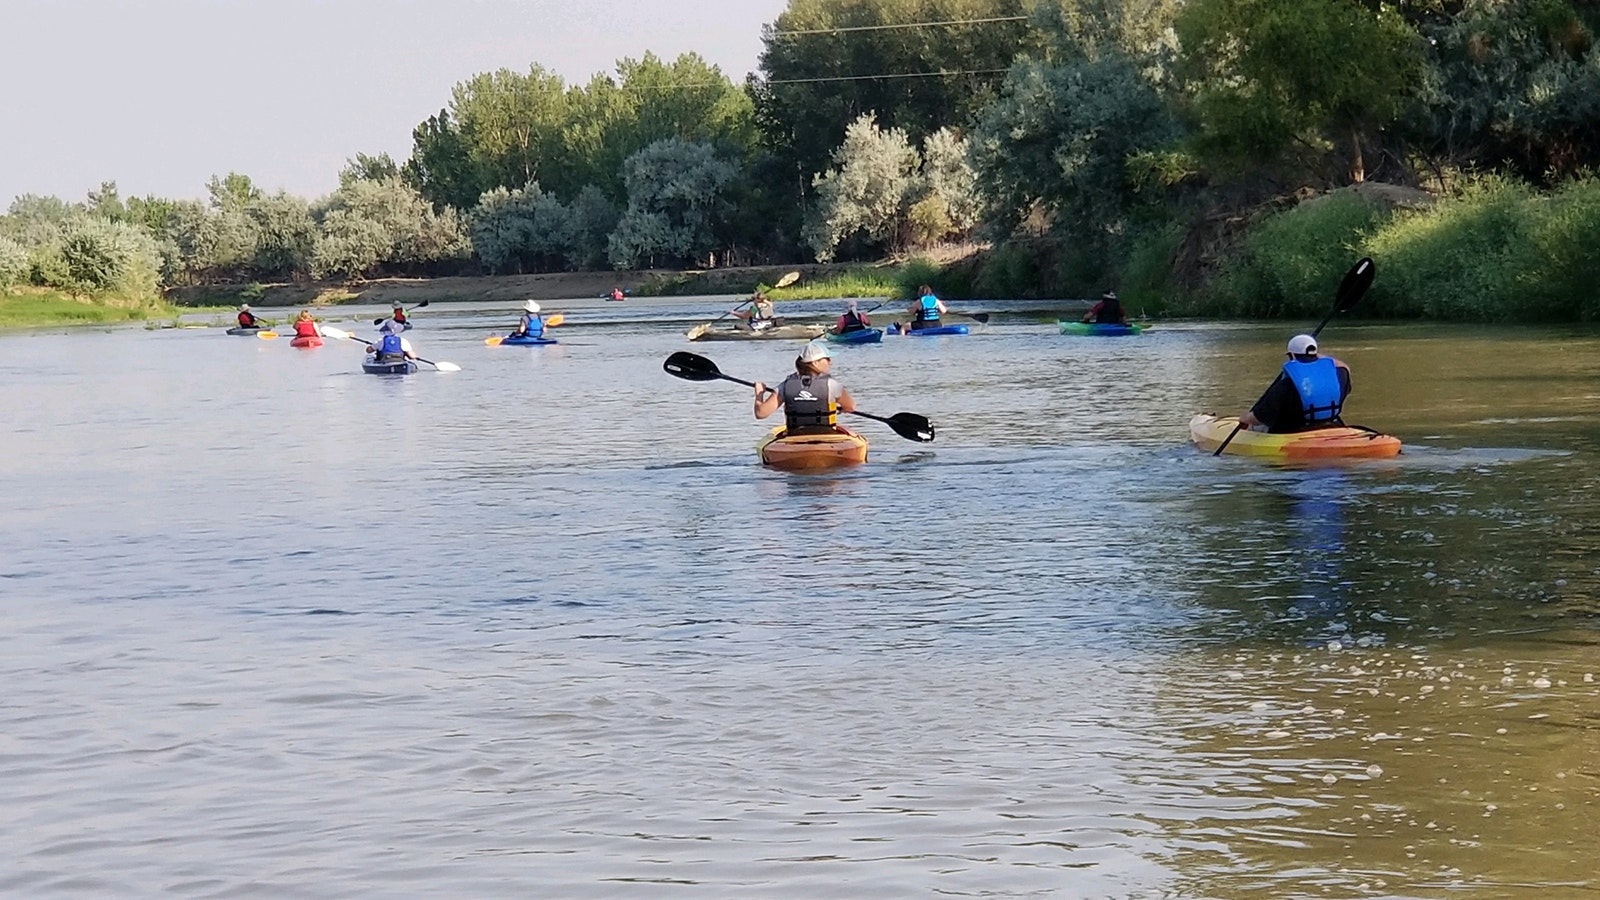 Kayaking on the Bighorn River makes for a great summer outing.